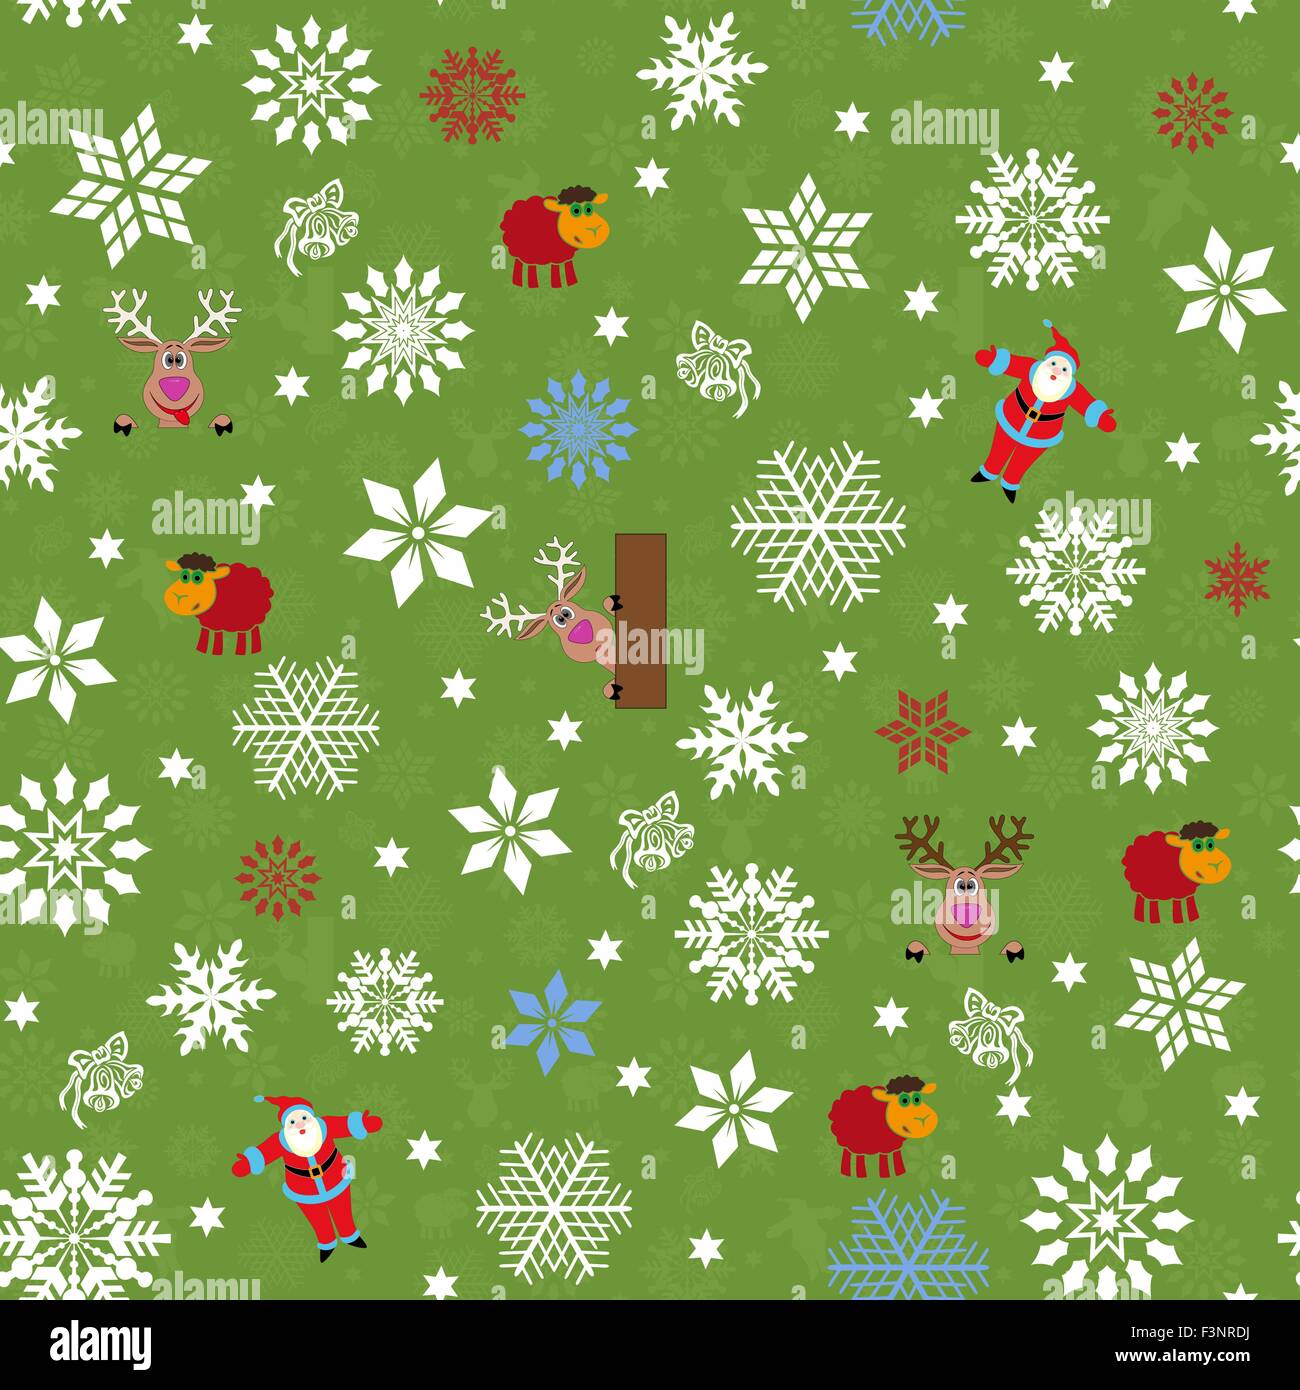 Seamless vector pattern for Christmas motifs with Santa, reindeer, sheep and many snowflakes over green seamless background Stock Vector